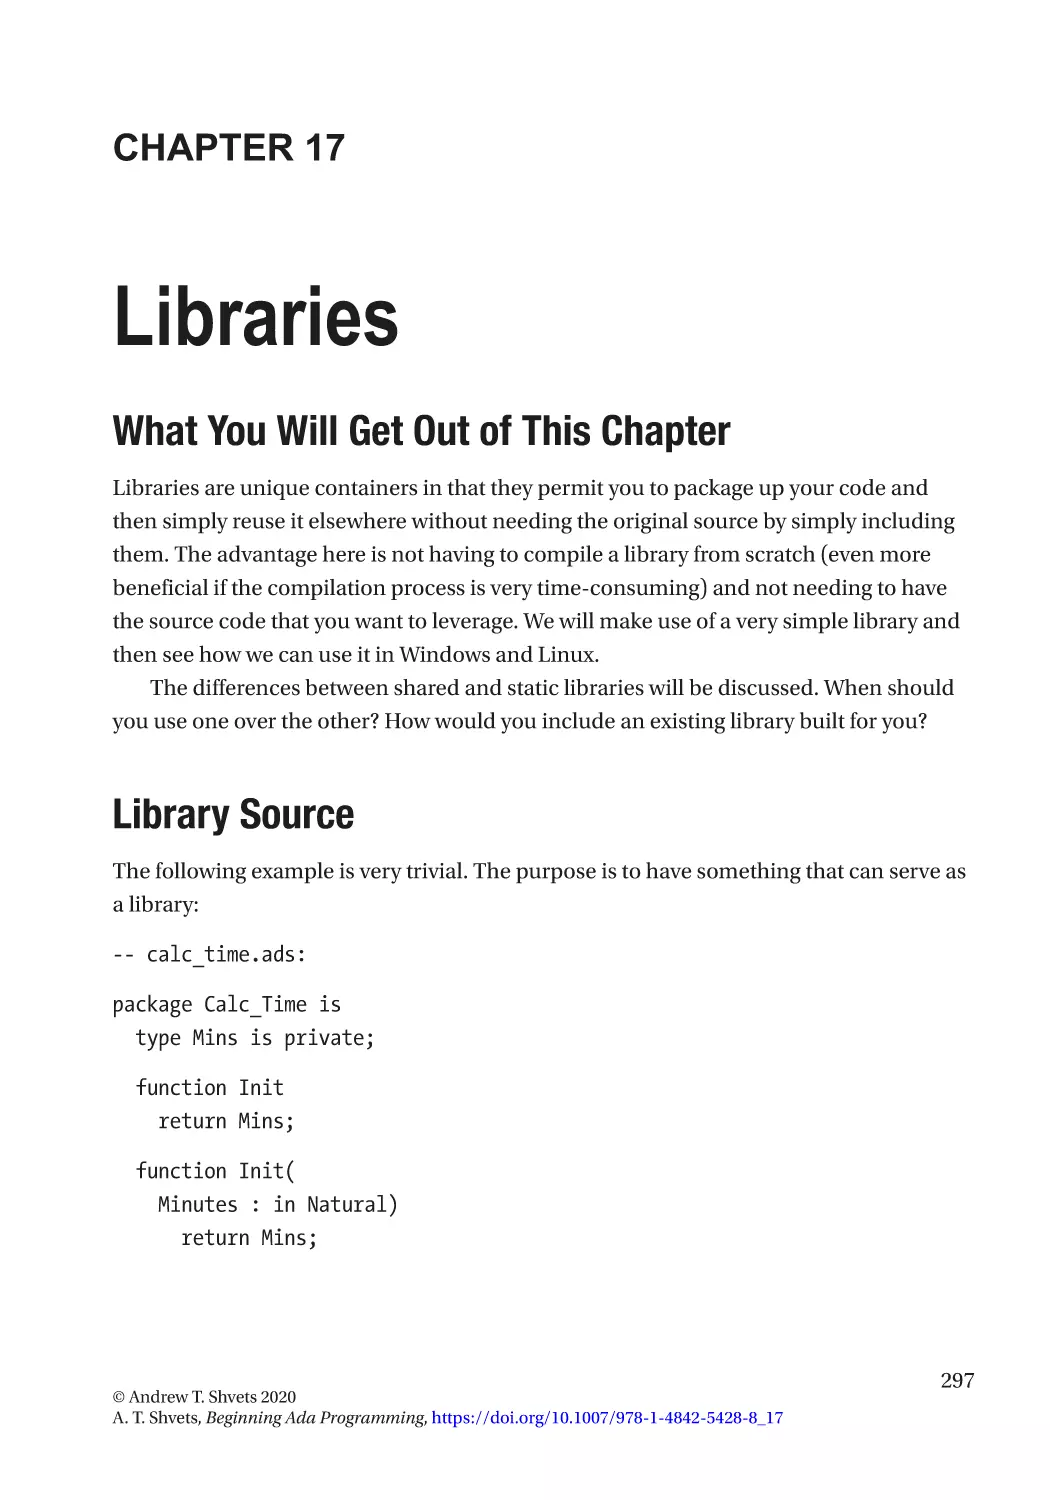 Chapter 17
What You Will Get Out of This Chapter
Library Source